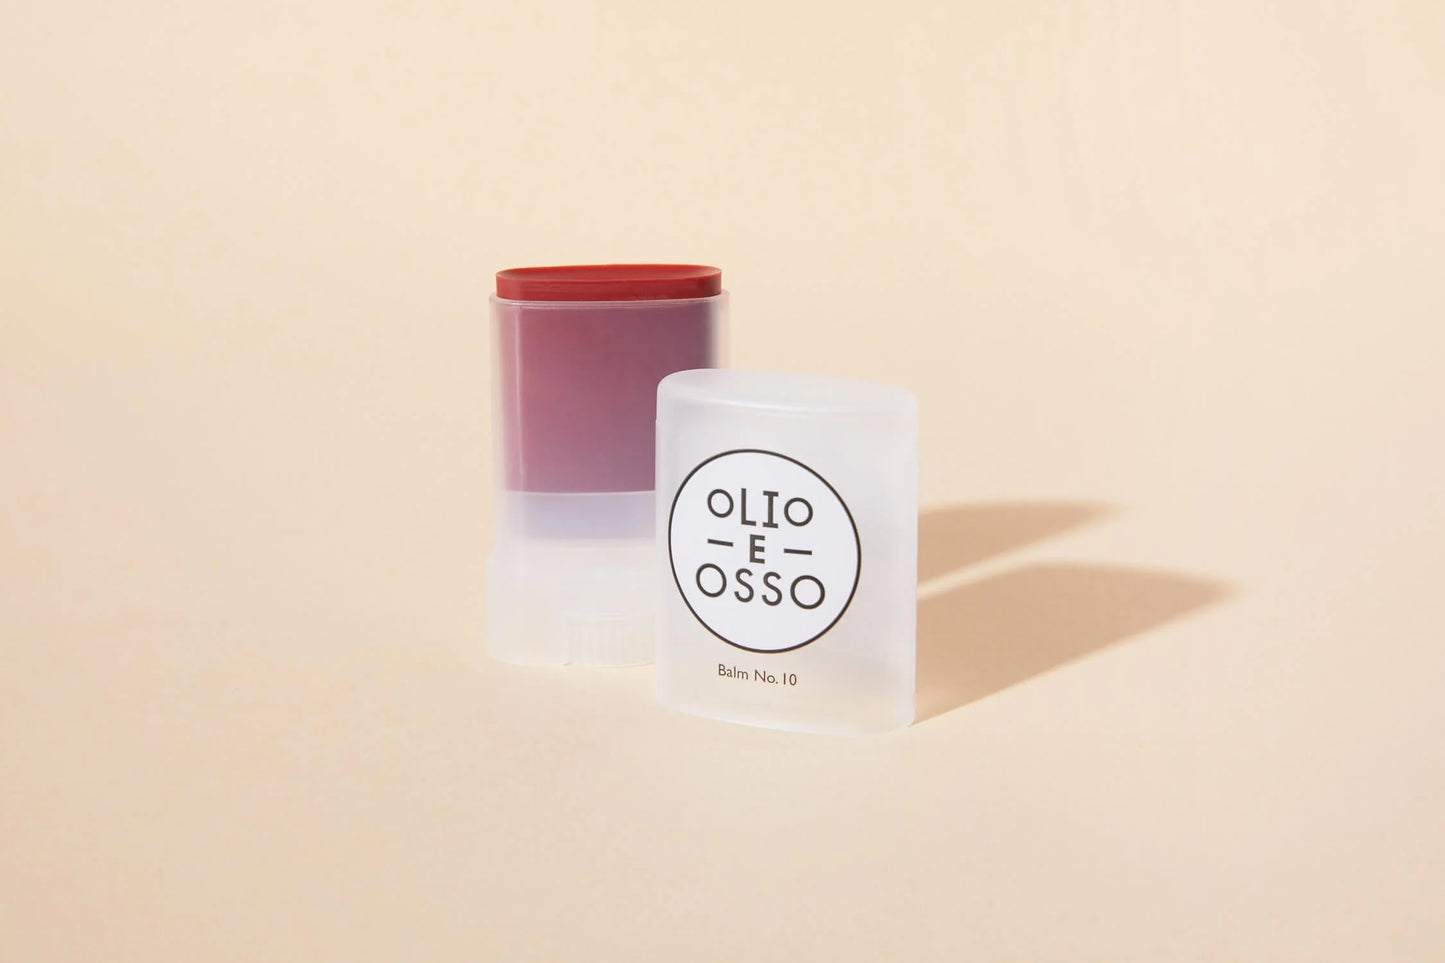 Functional beauty at its finest, Olio E Osso balms nourish lips and cheeks while providing the perfect touch of color.